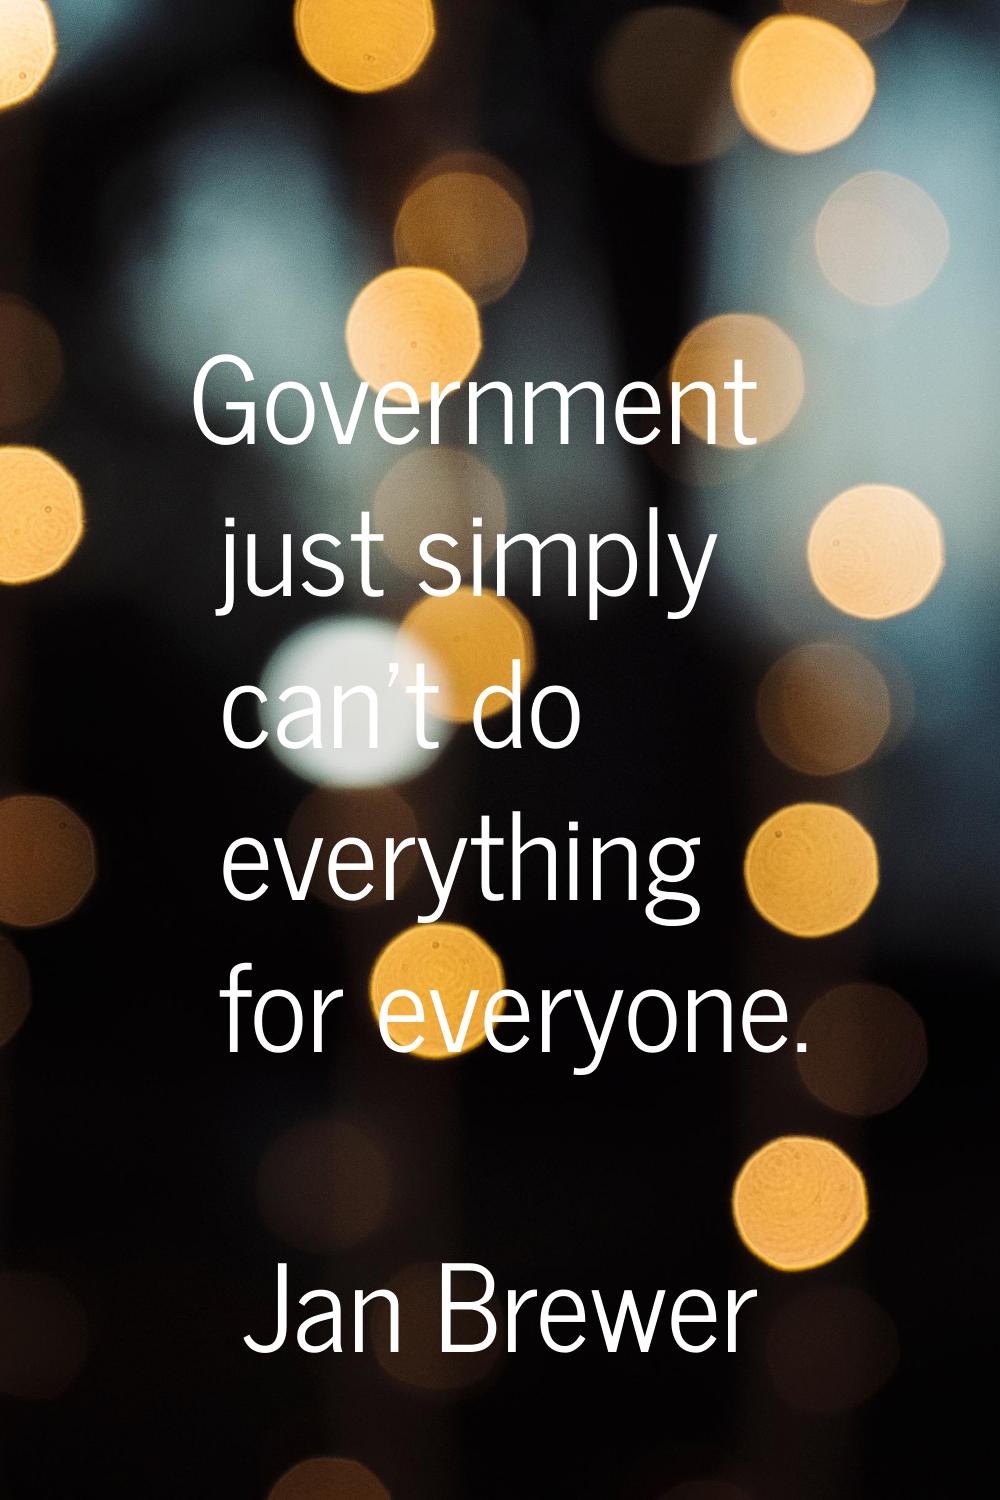 Government just simply can't do everything for everyone.